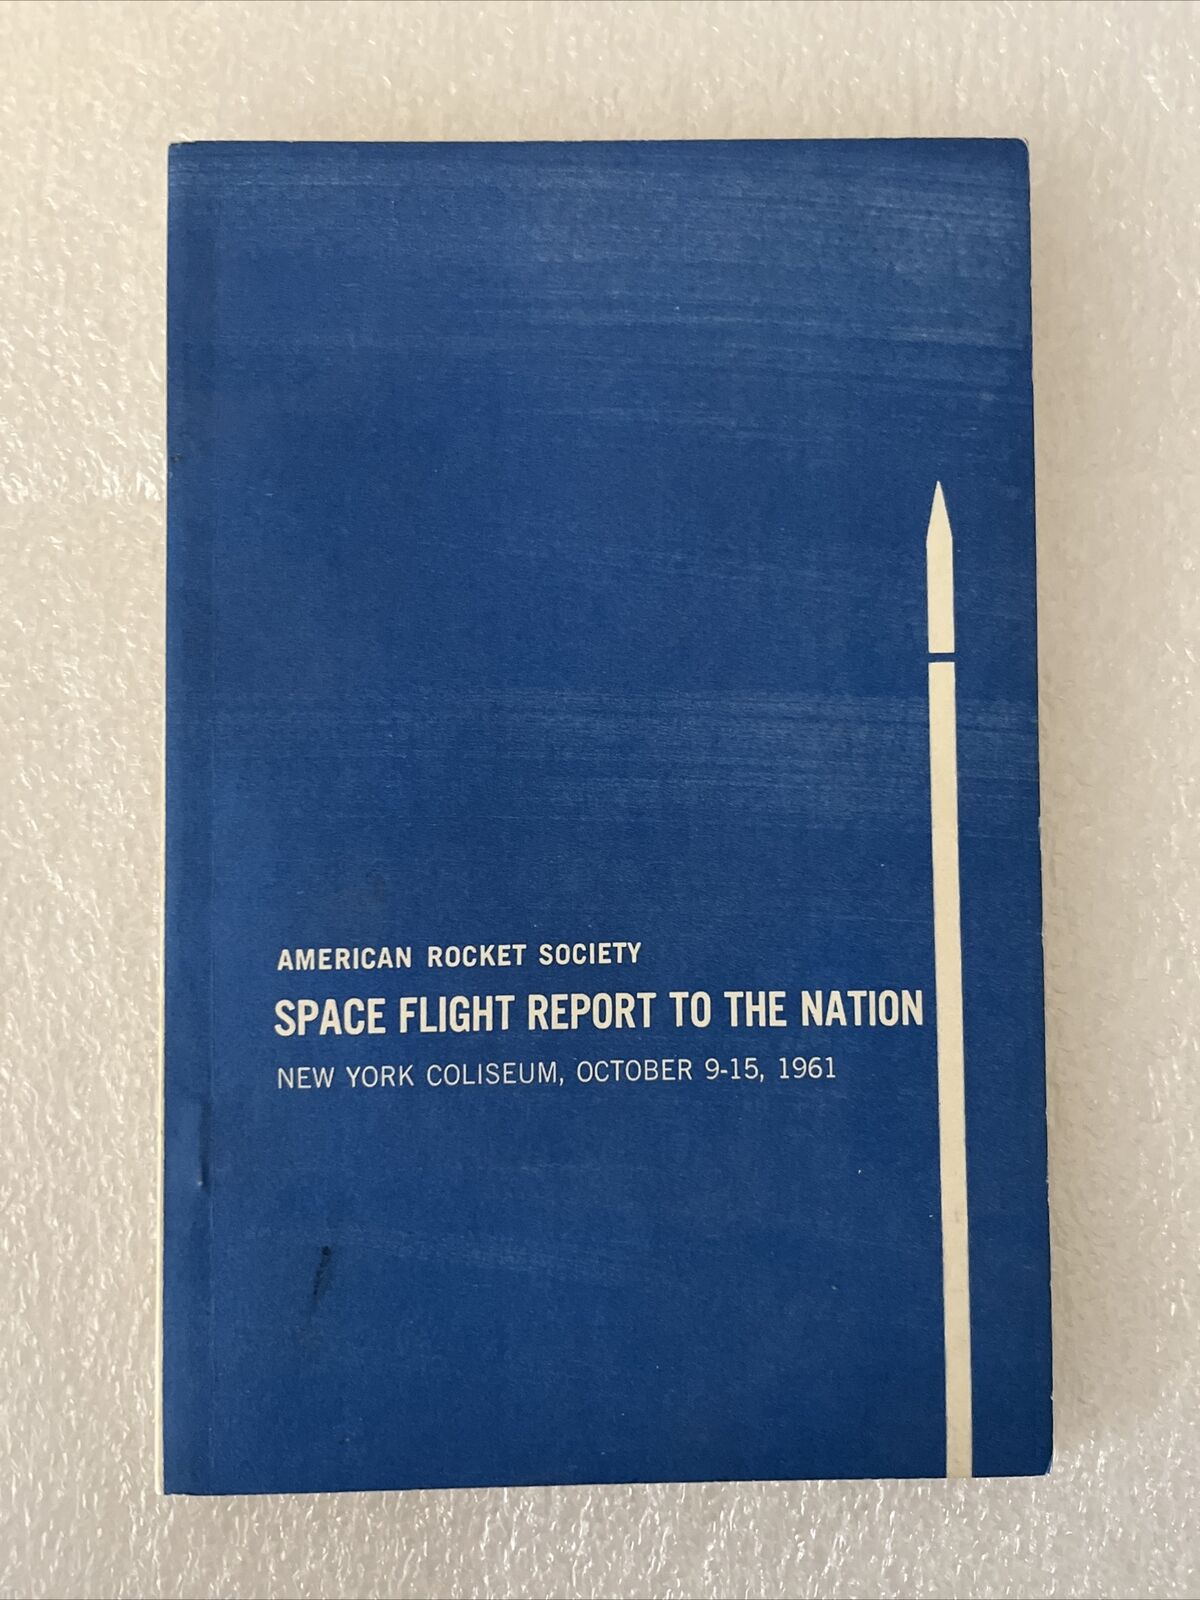 American Rocket Society, Space Flight Report To The Nation